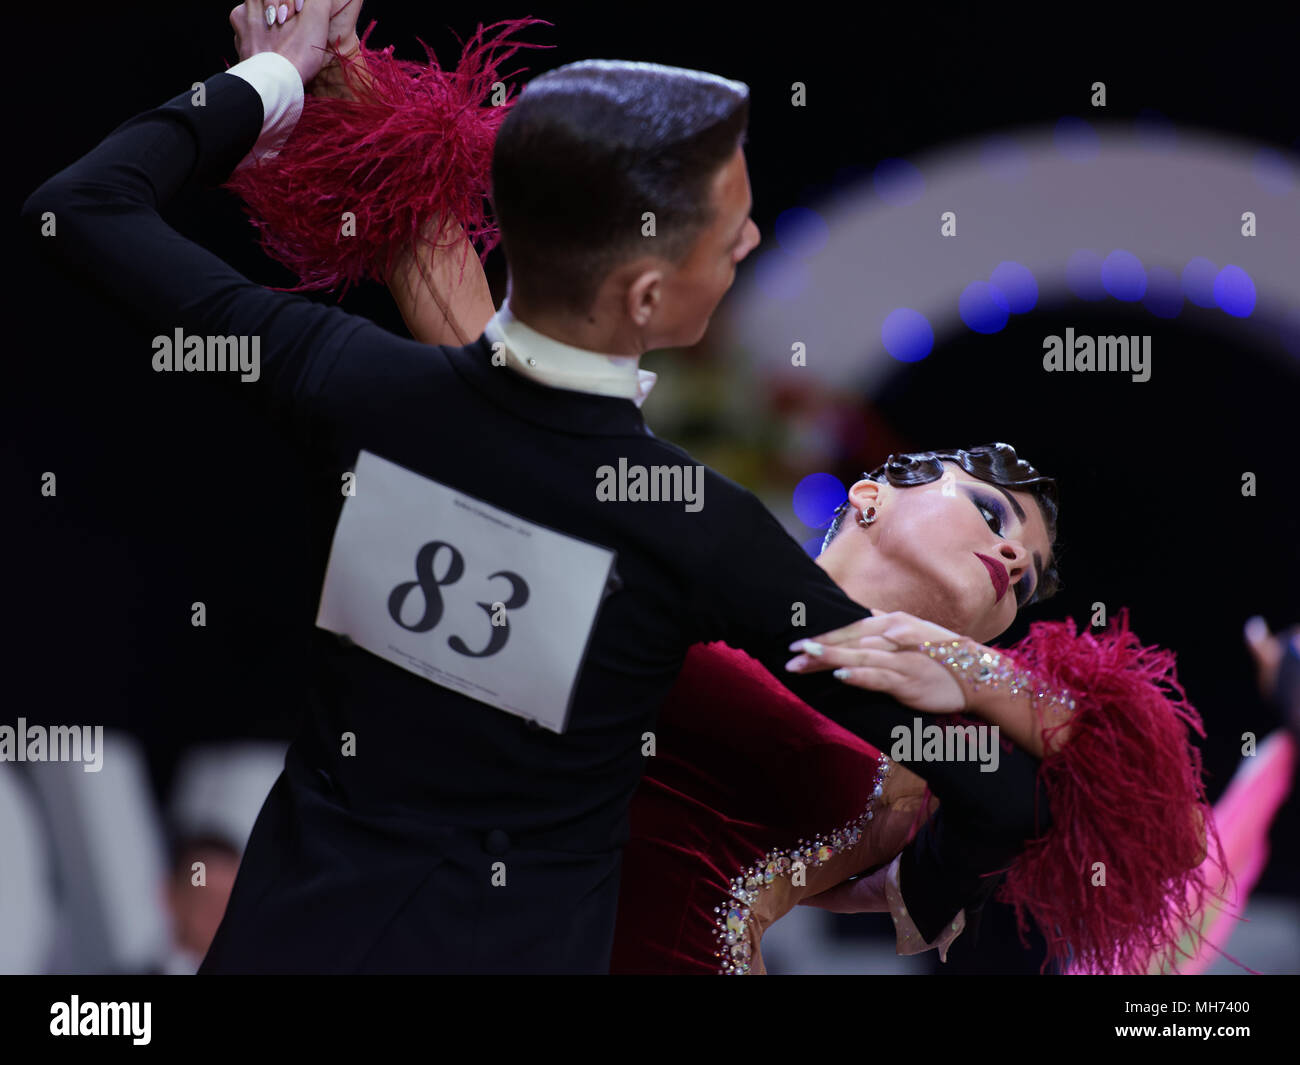 St. Petersburg, Russia - April 20, 2018: People compete in dancesport for Saint Petersburg Governor's Cup. 14th tournament includes WDSF International Stock Photo